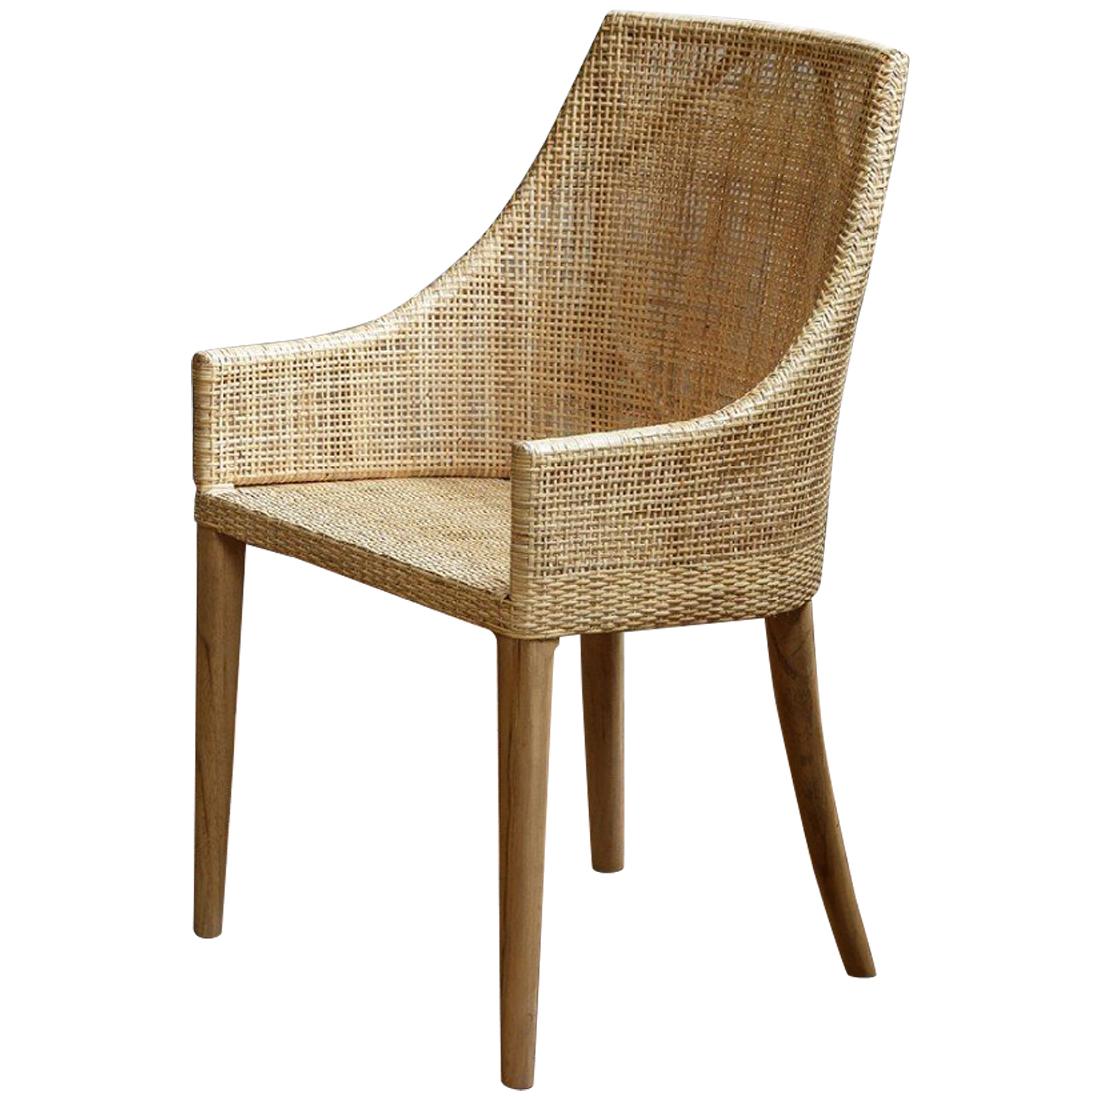 Elegant rattan armchair with a structure in natural teak and a braided rattan seating shell, combining quality, robustness and class. Perfect on your terrace, in your veranda, your winter garden, around the dining table and even in your office! In